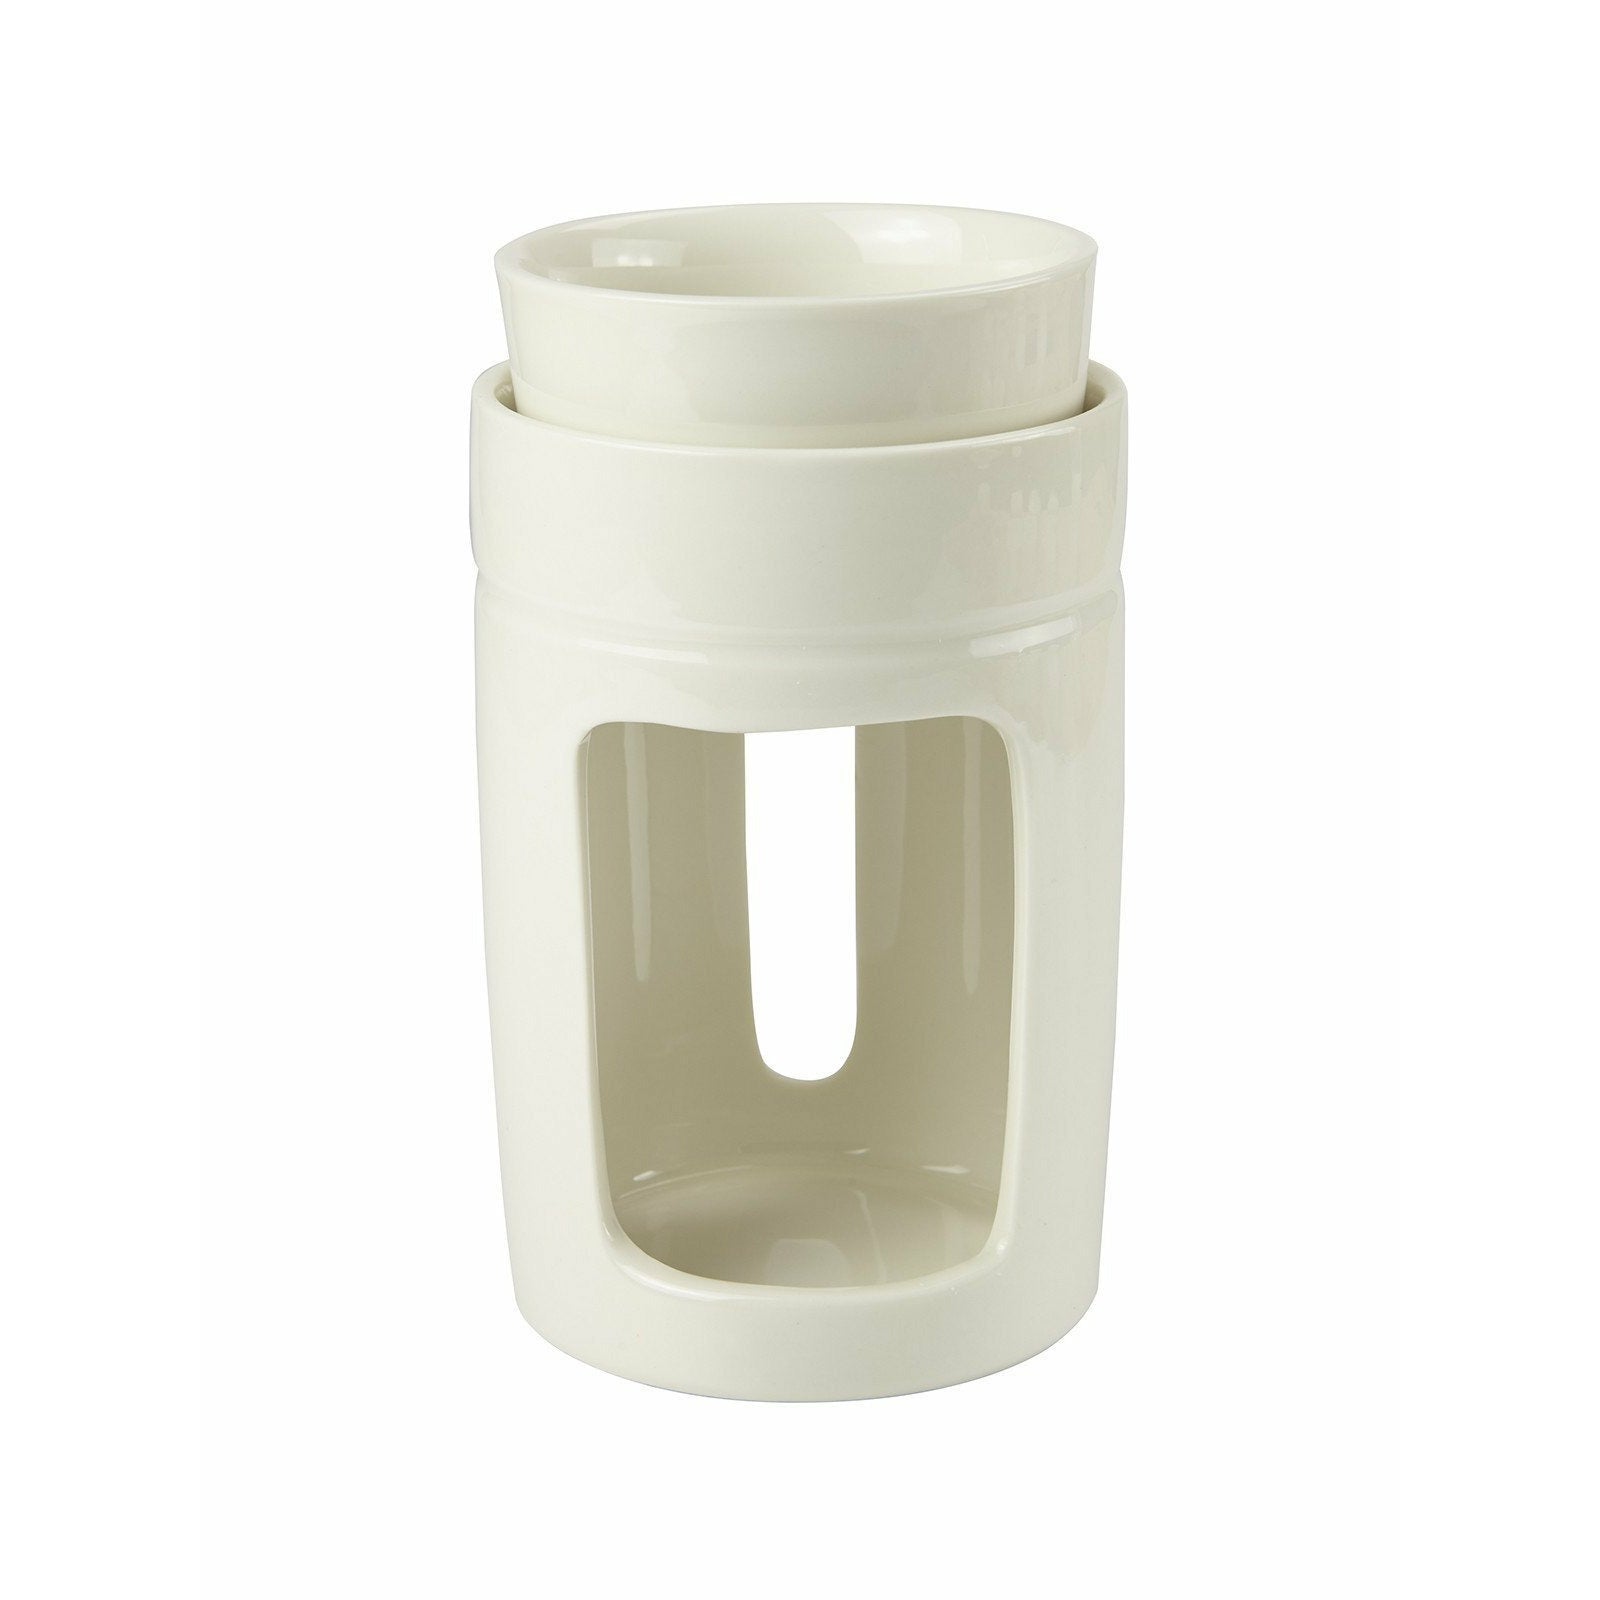 ACCESSORIES OIL BURNER CYLINDER WHITE/WHITE Not specified